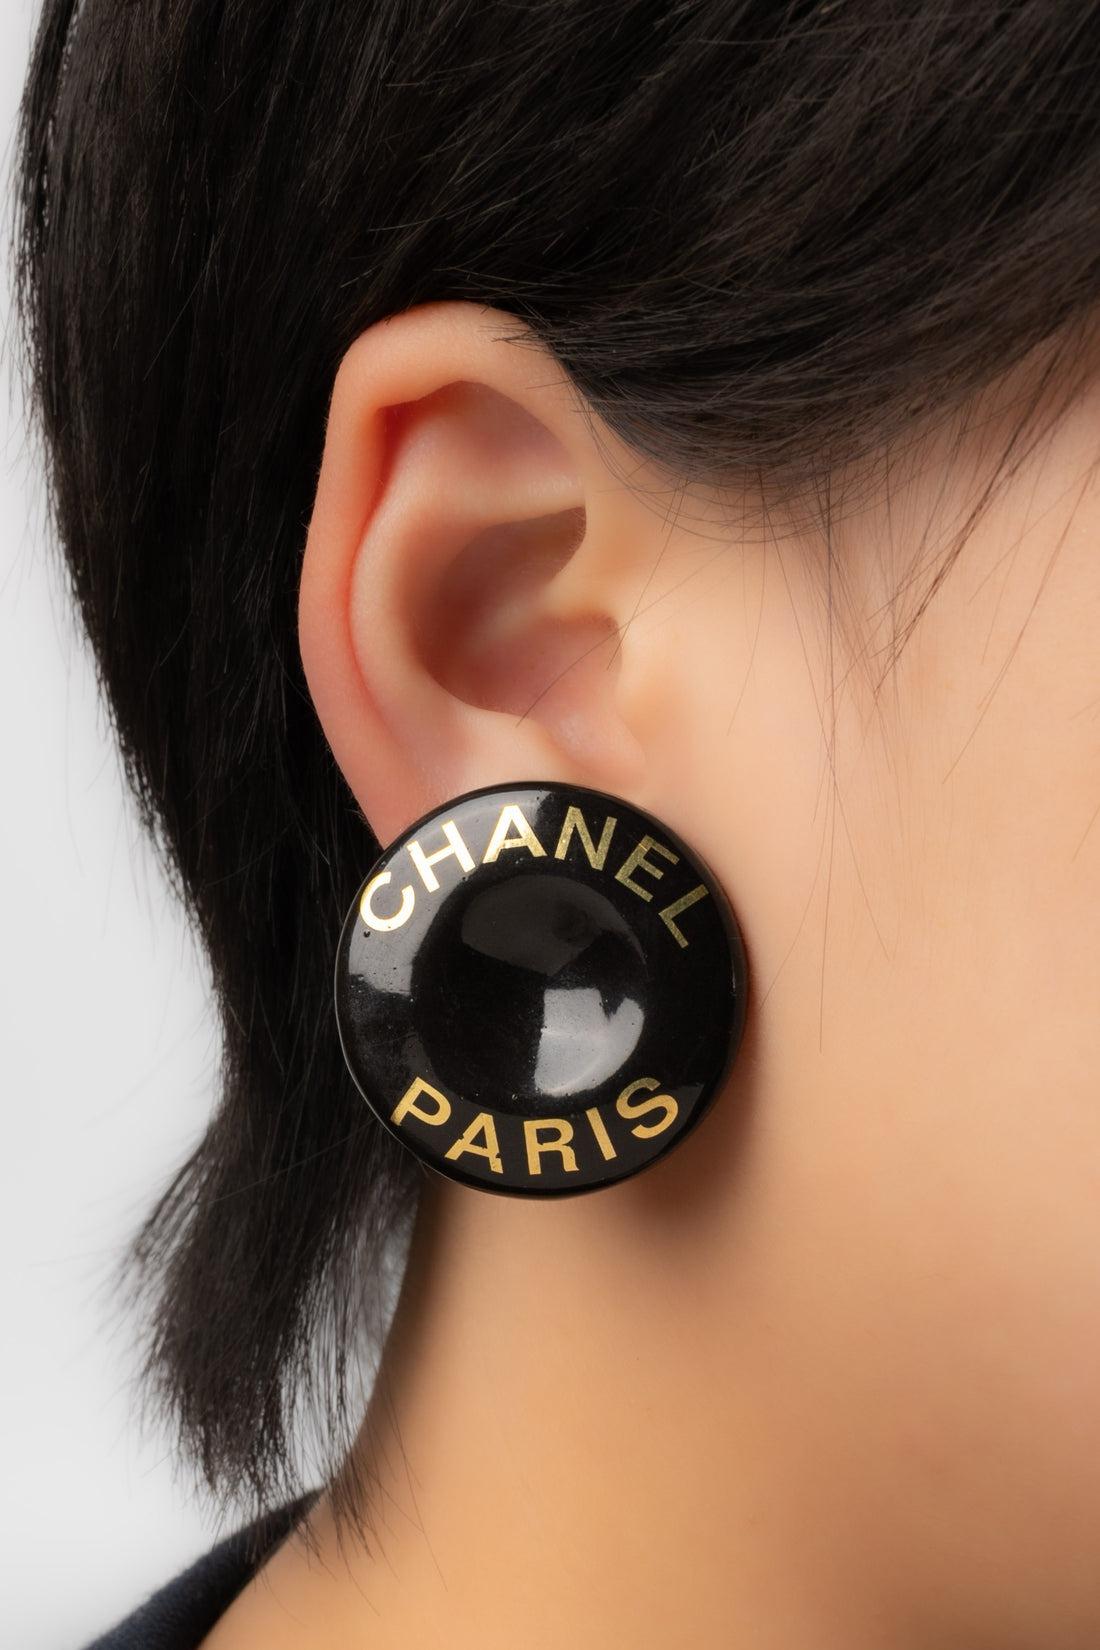 Chanel - (Made in France) Clip-on earrings in golden metal and black bakelite. Spring-Summer 1997 Collection.

Additional information:
Condition: Very good condition
Dimensions: Diameter: 3.5 cm
Period: 20th Century

Seller Reference: BOB149